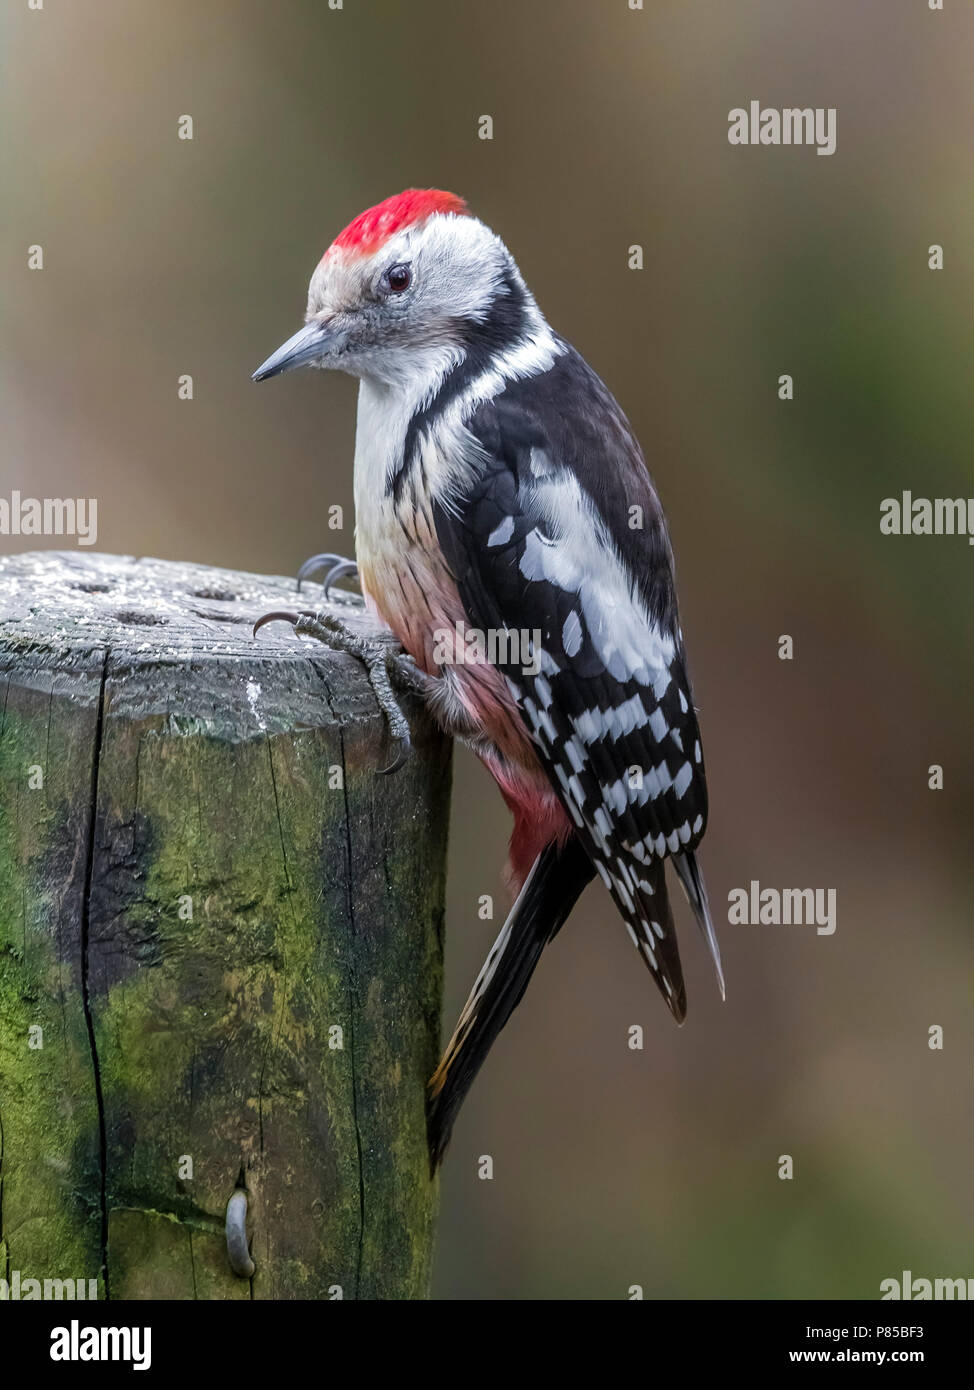 Adult Middle Spotted Woodpecker sitting on a feeding point, Auderghem, Brussels, Belgium. March 05, 2018. Stock Photo